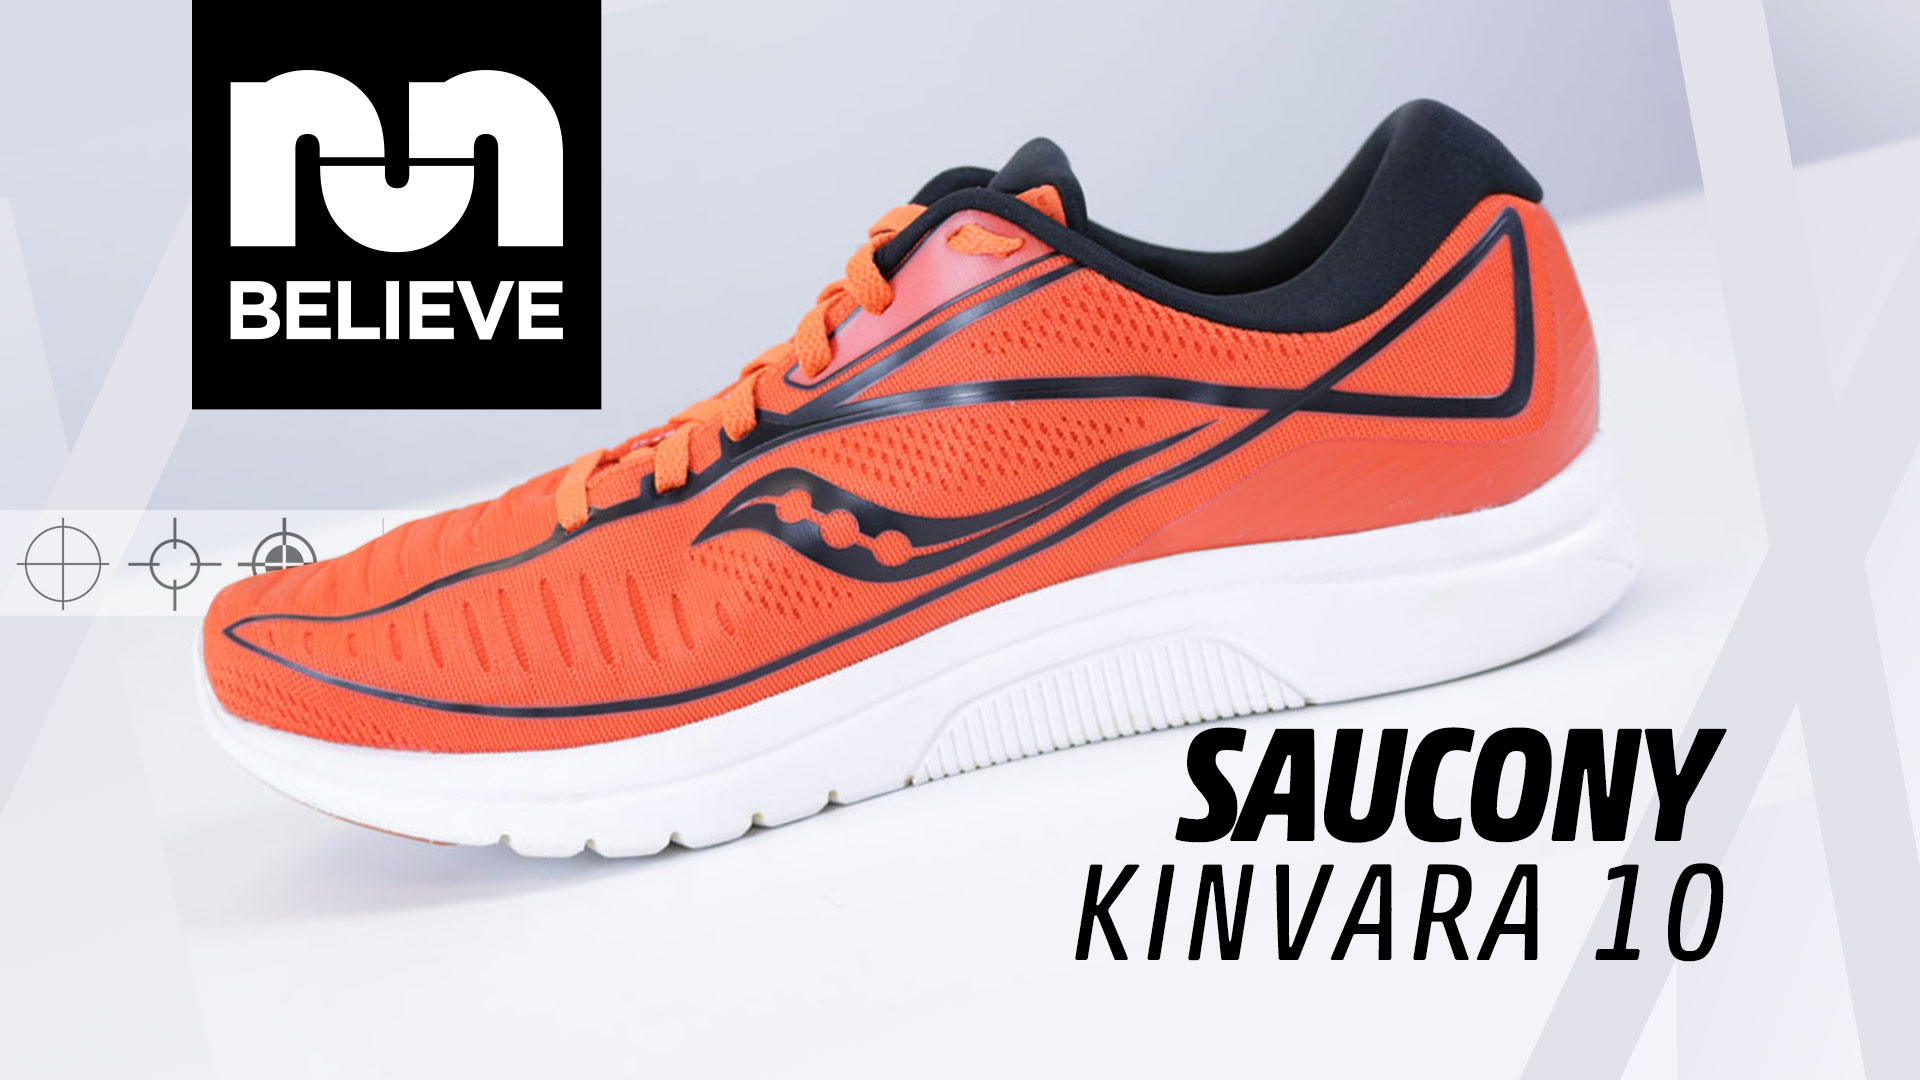 Saucony Kinvara 10 Video Performance Review - Believe in the Run